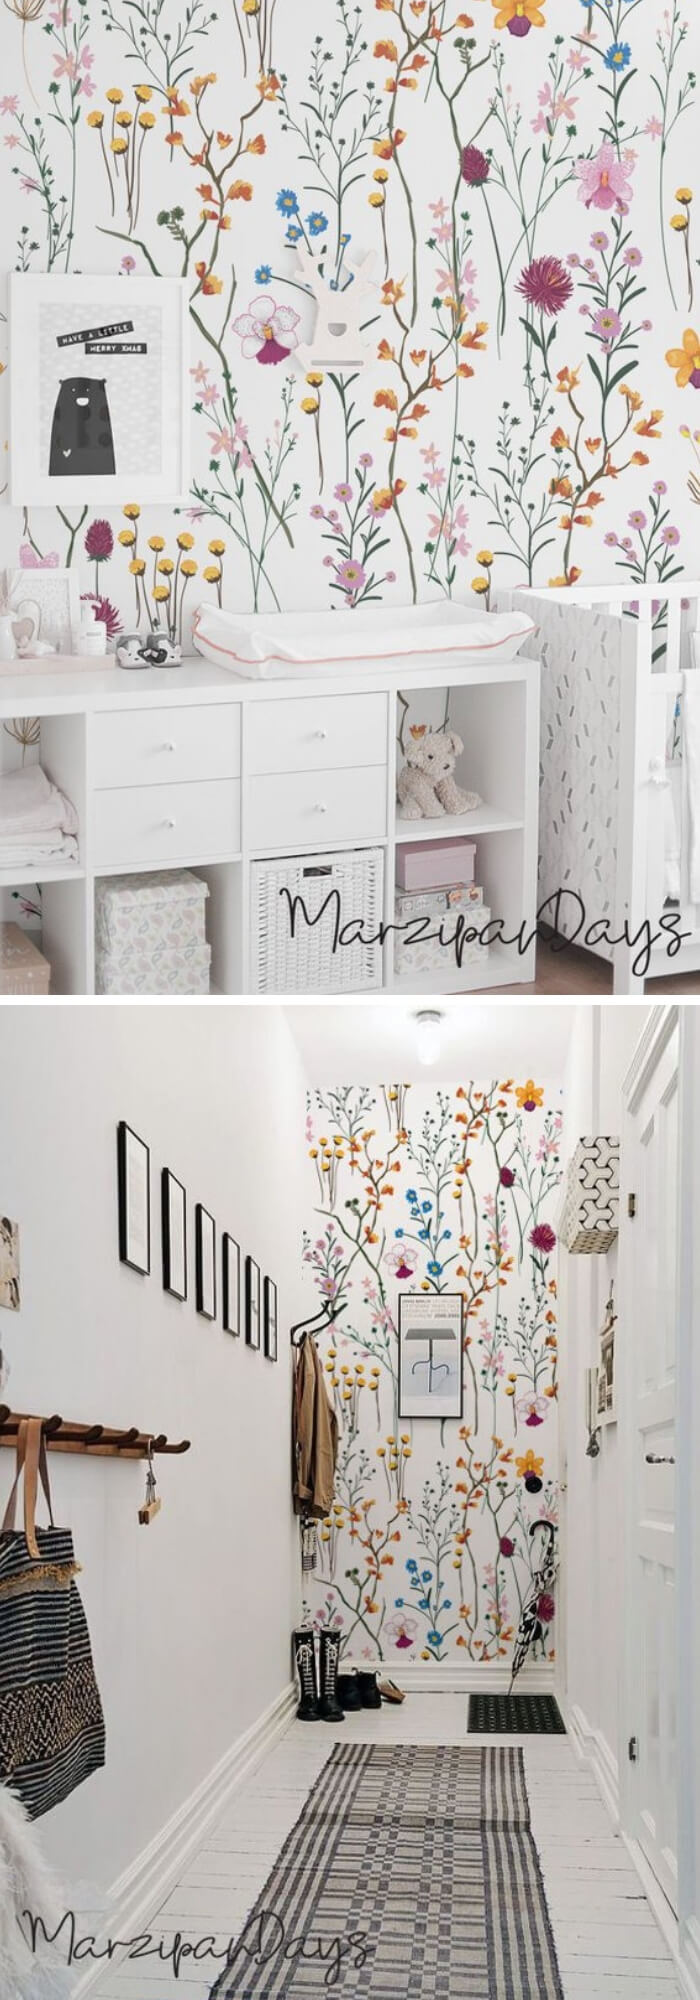 Home Decorating Ideas With Flowers: Wild flowers removable wallpaper